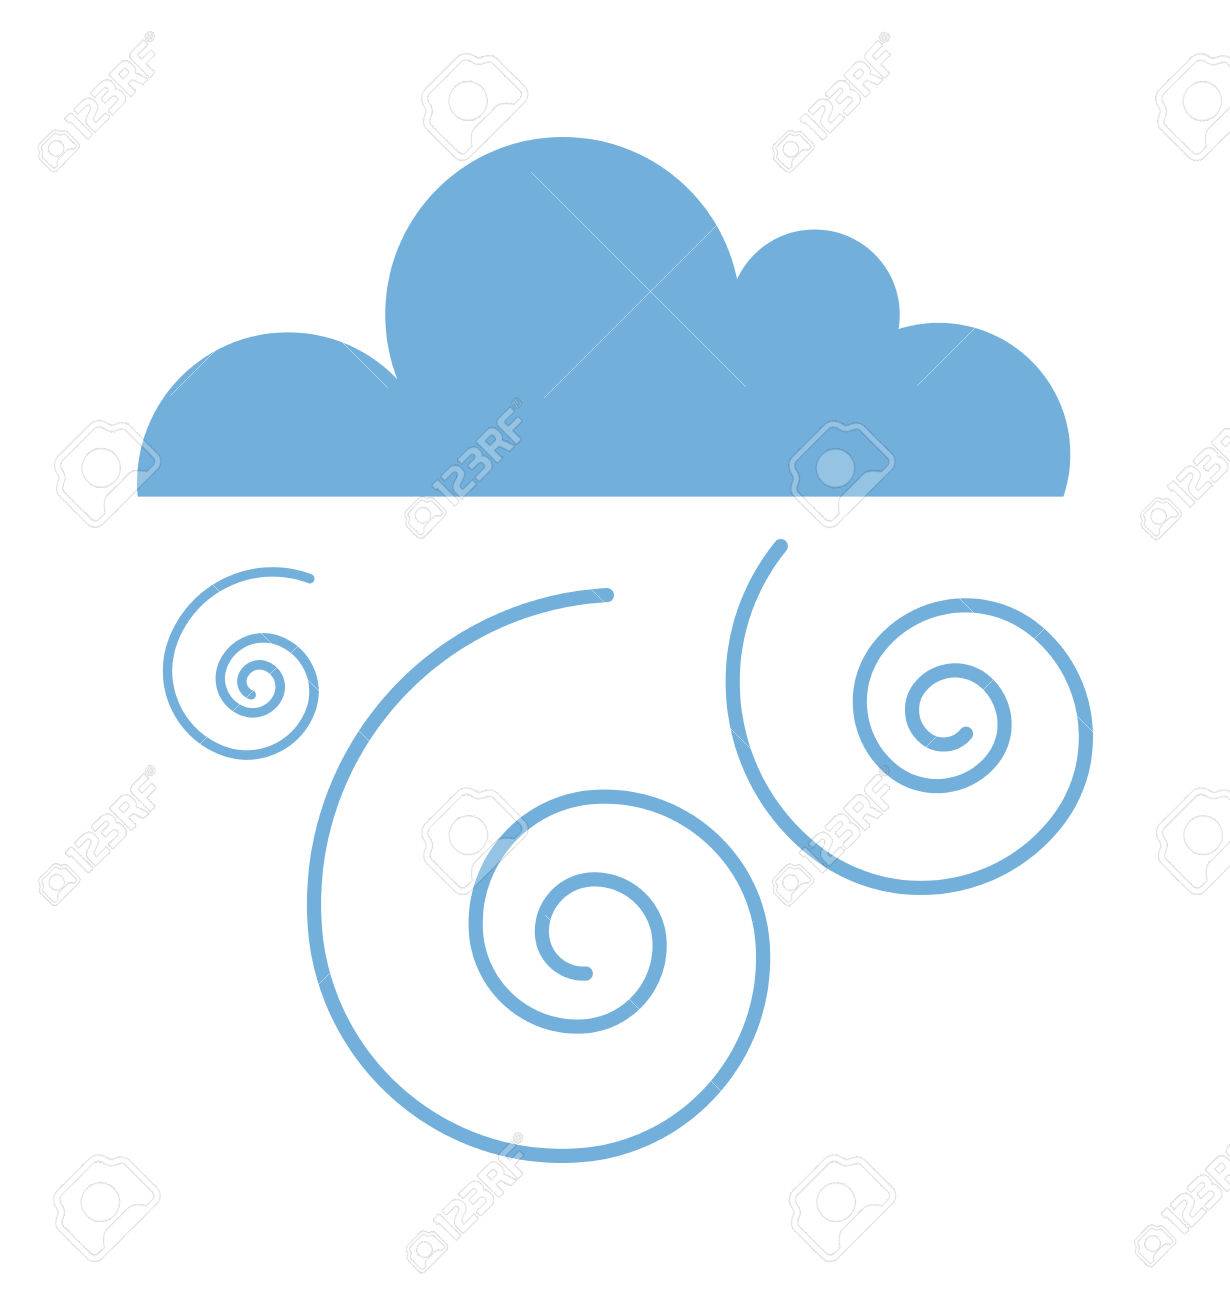 Stormy clouds - Free weather icons